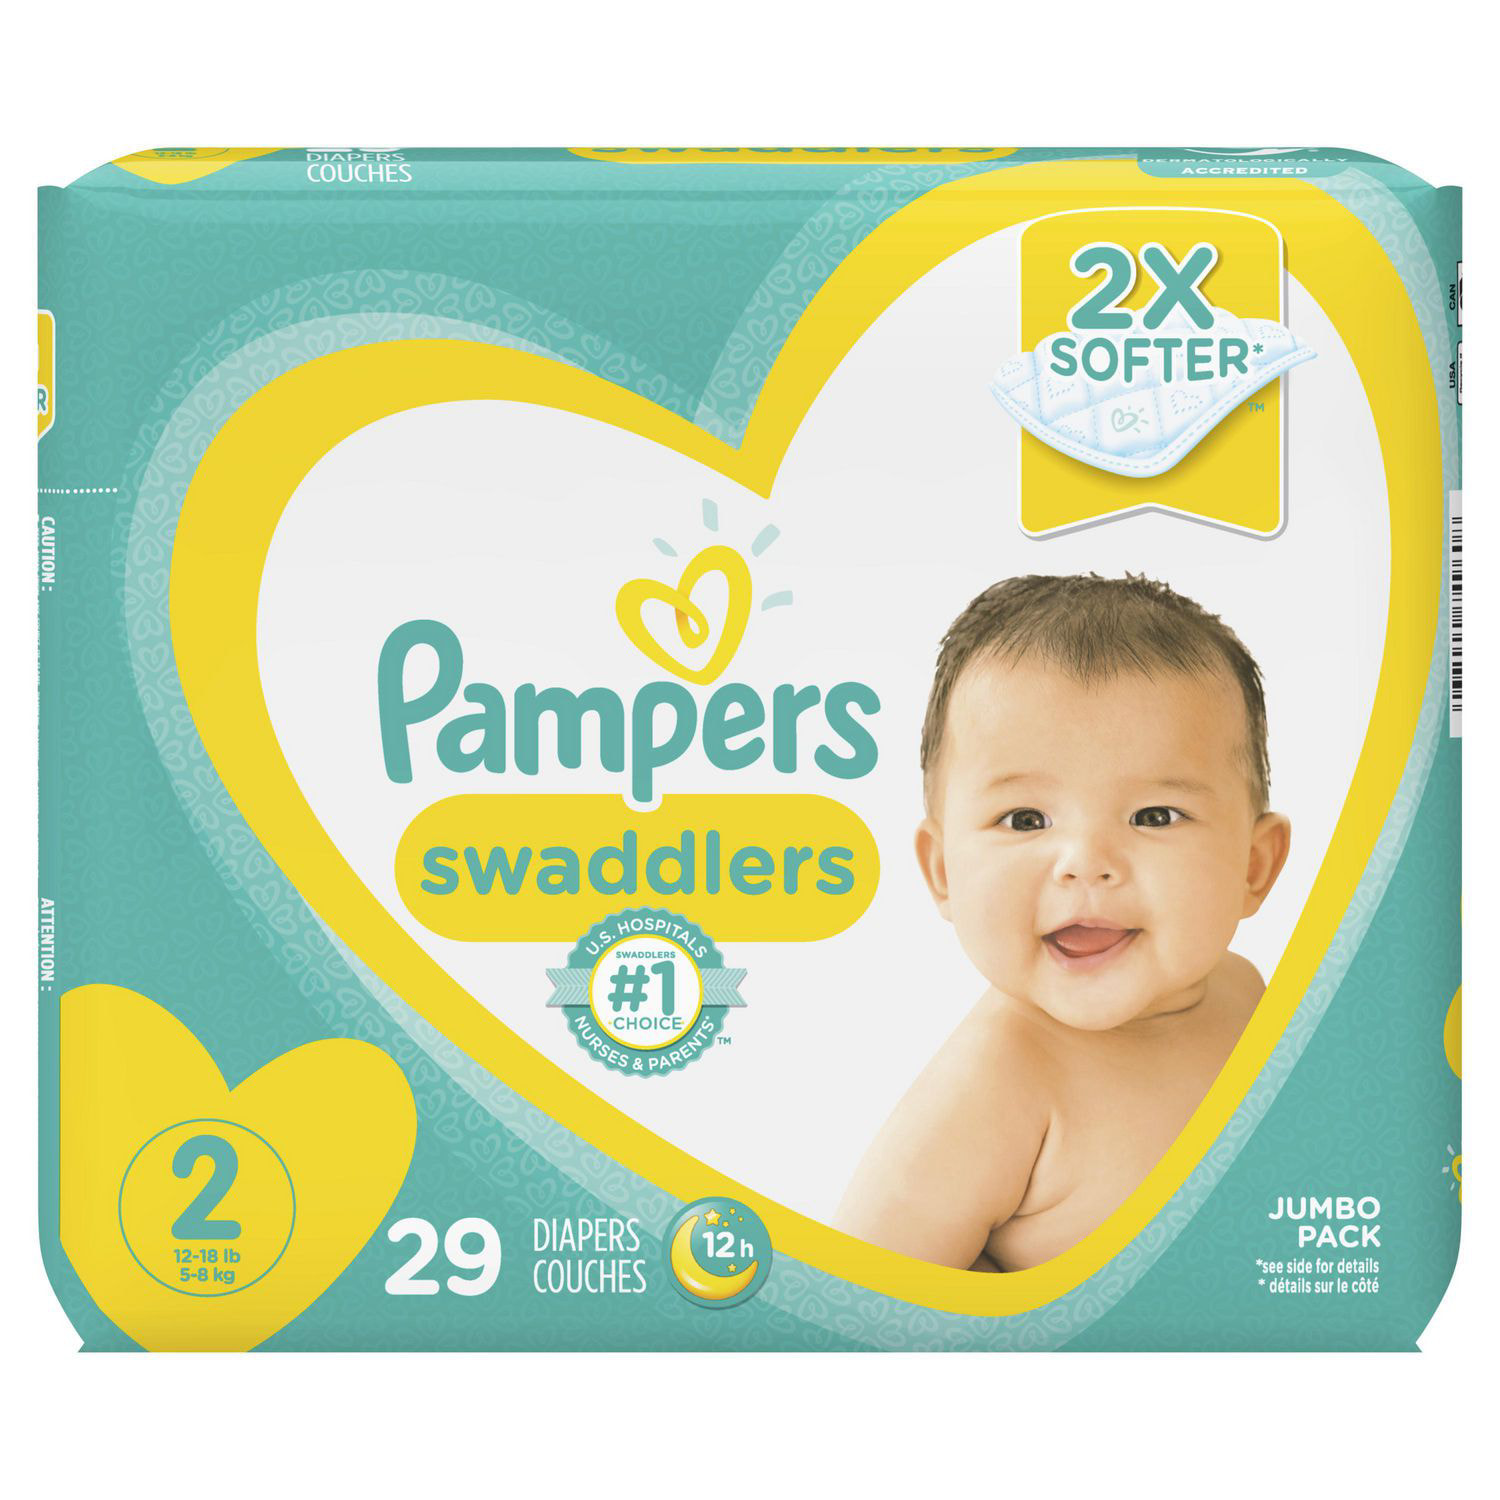 Pampers Swaddlers Diapers, Jumbo Pack, Sizes P-S, N, 1, 2, 3, 4, 5